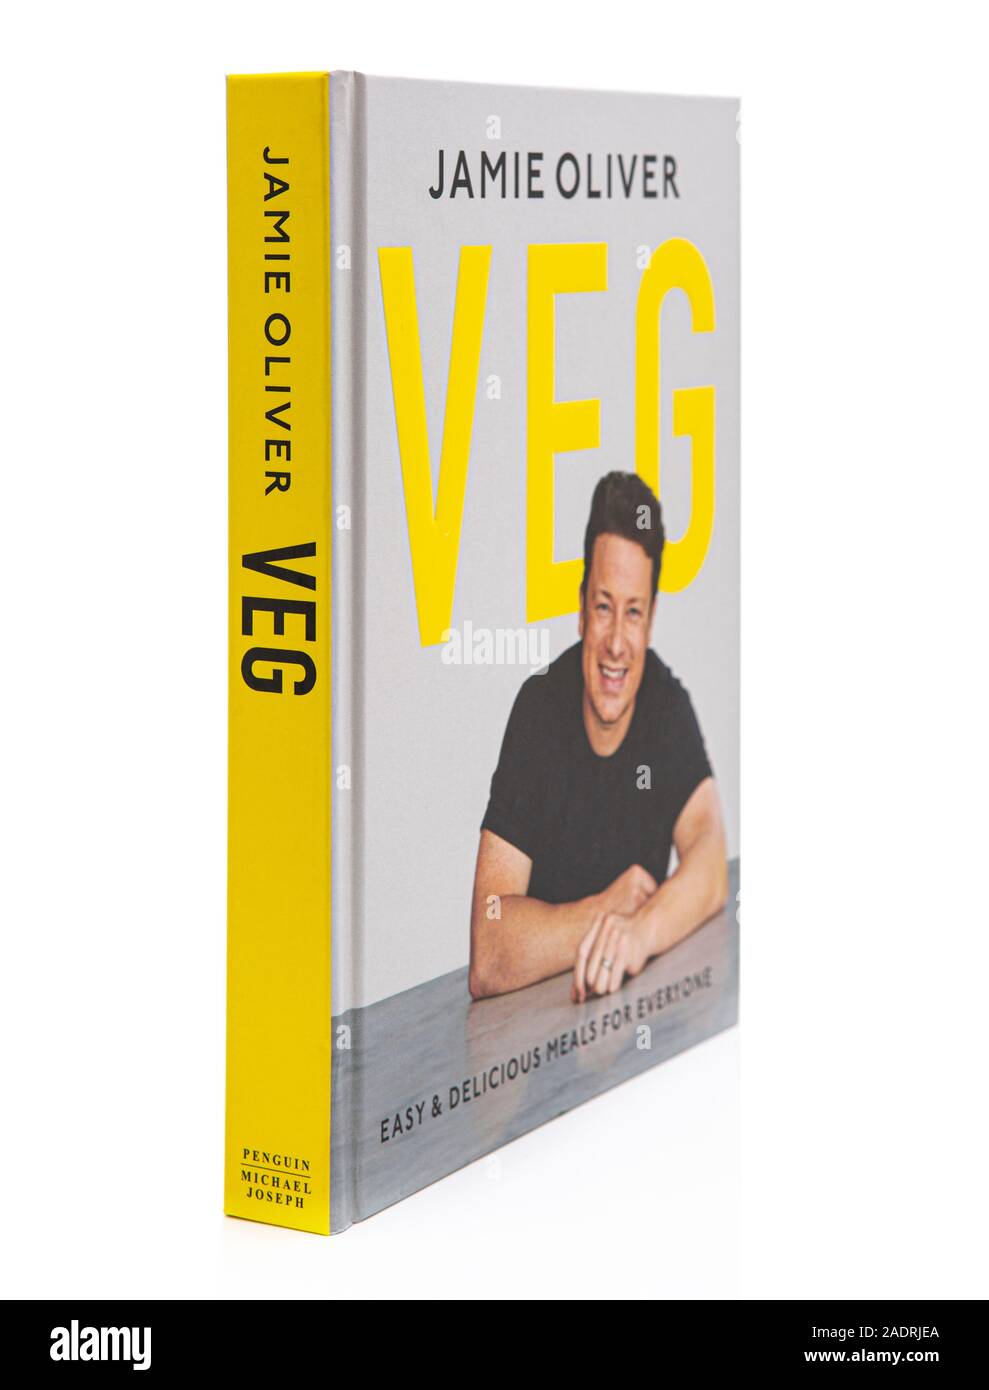 SWINDON, UK - NOVEMBER 25, 2019: Jamie Oliver Veg Cook Book, Easy and Delicious Meals for everyone on a white background. Stock Photo